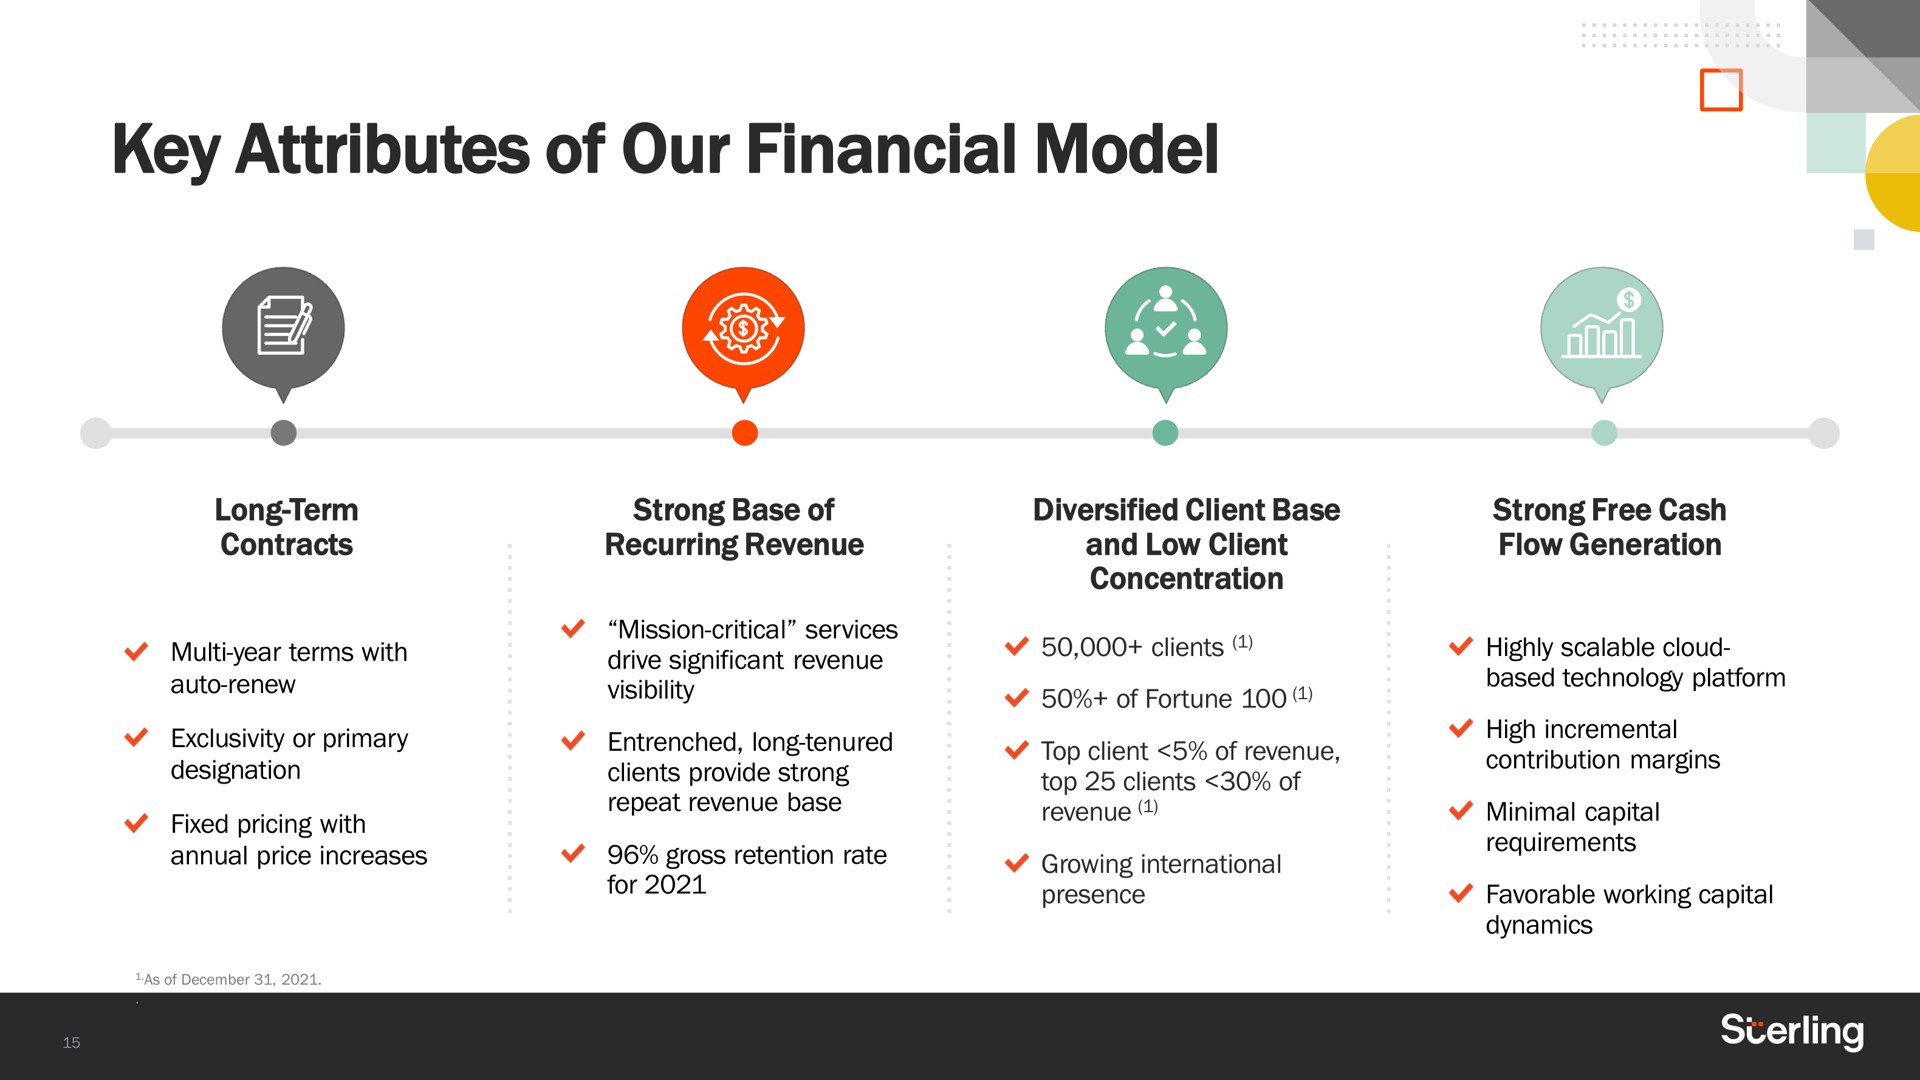 key attributes of our financial model | Sterling